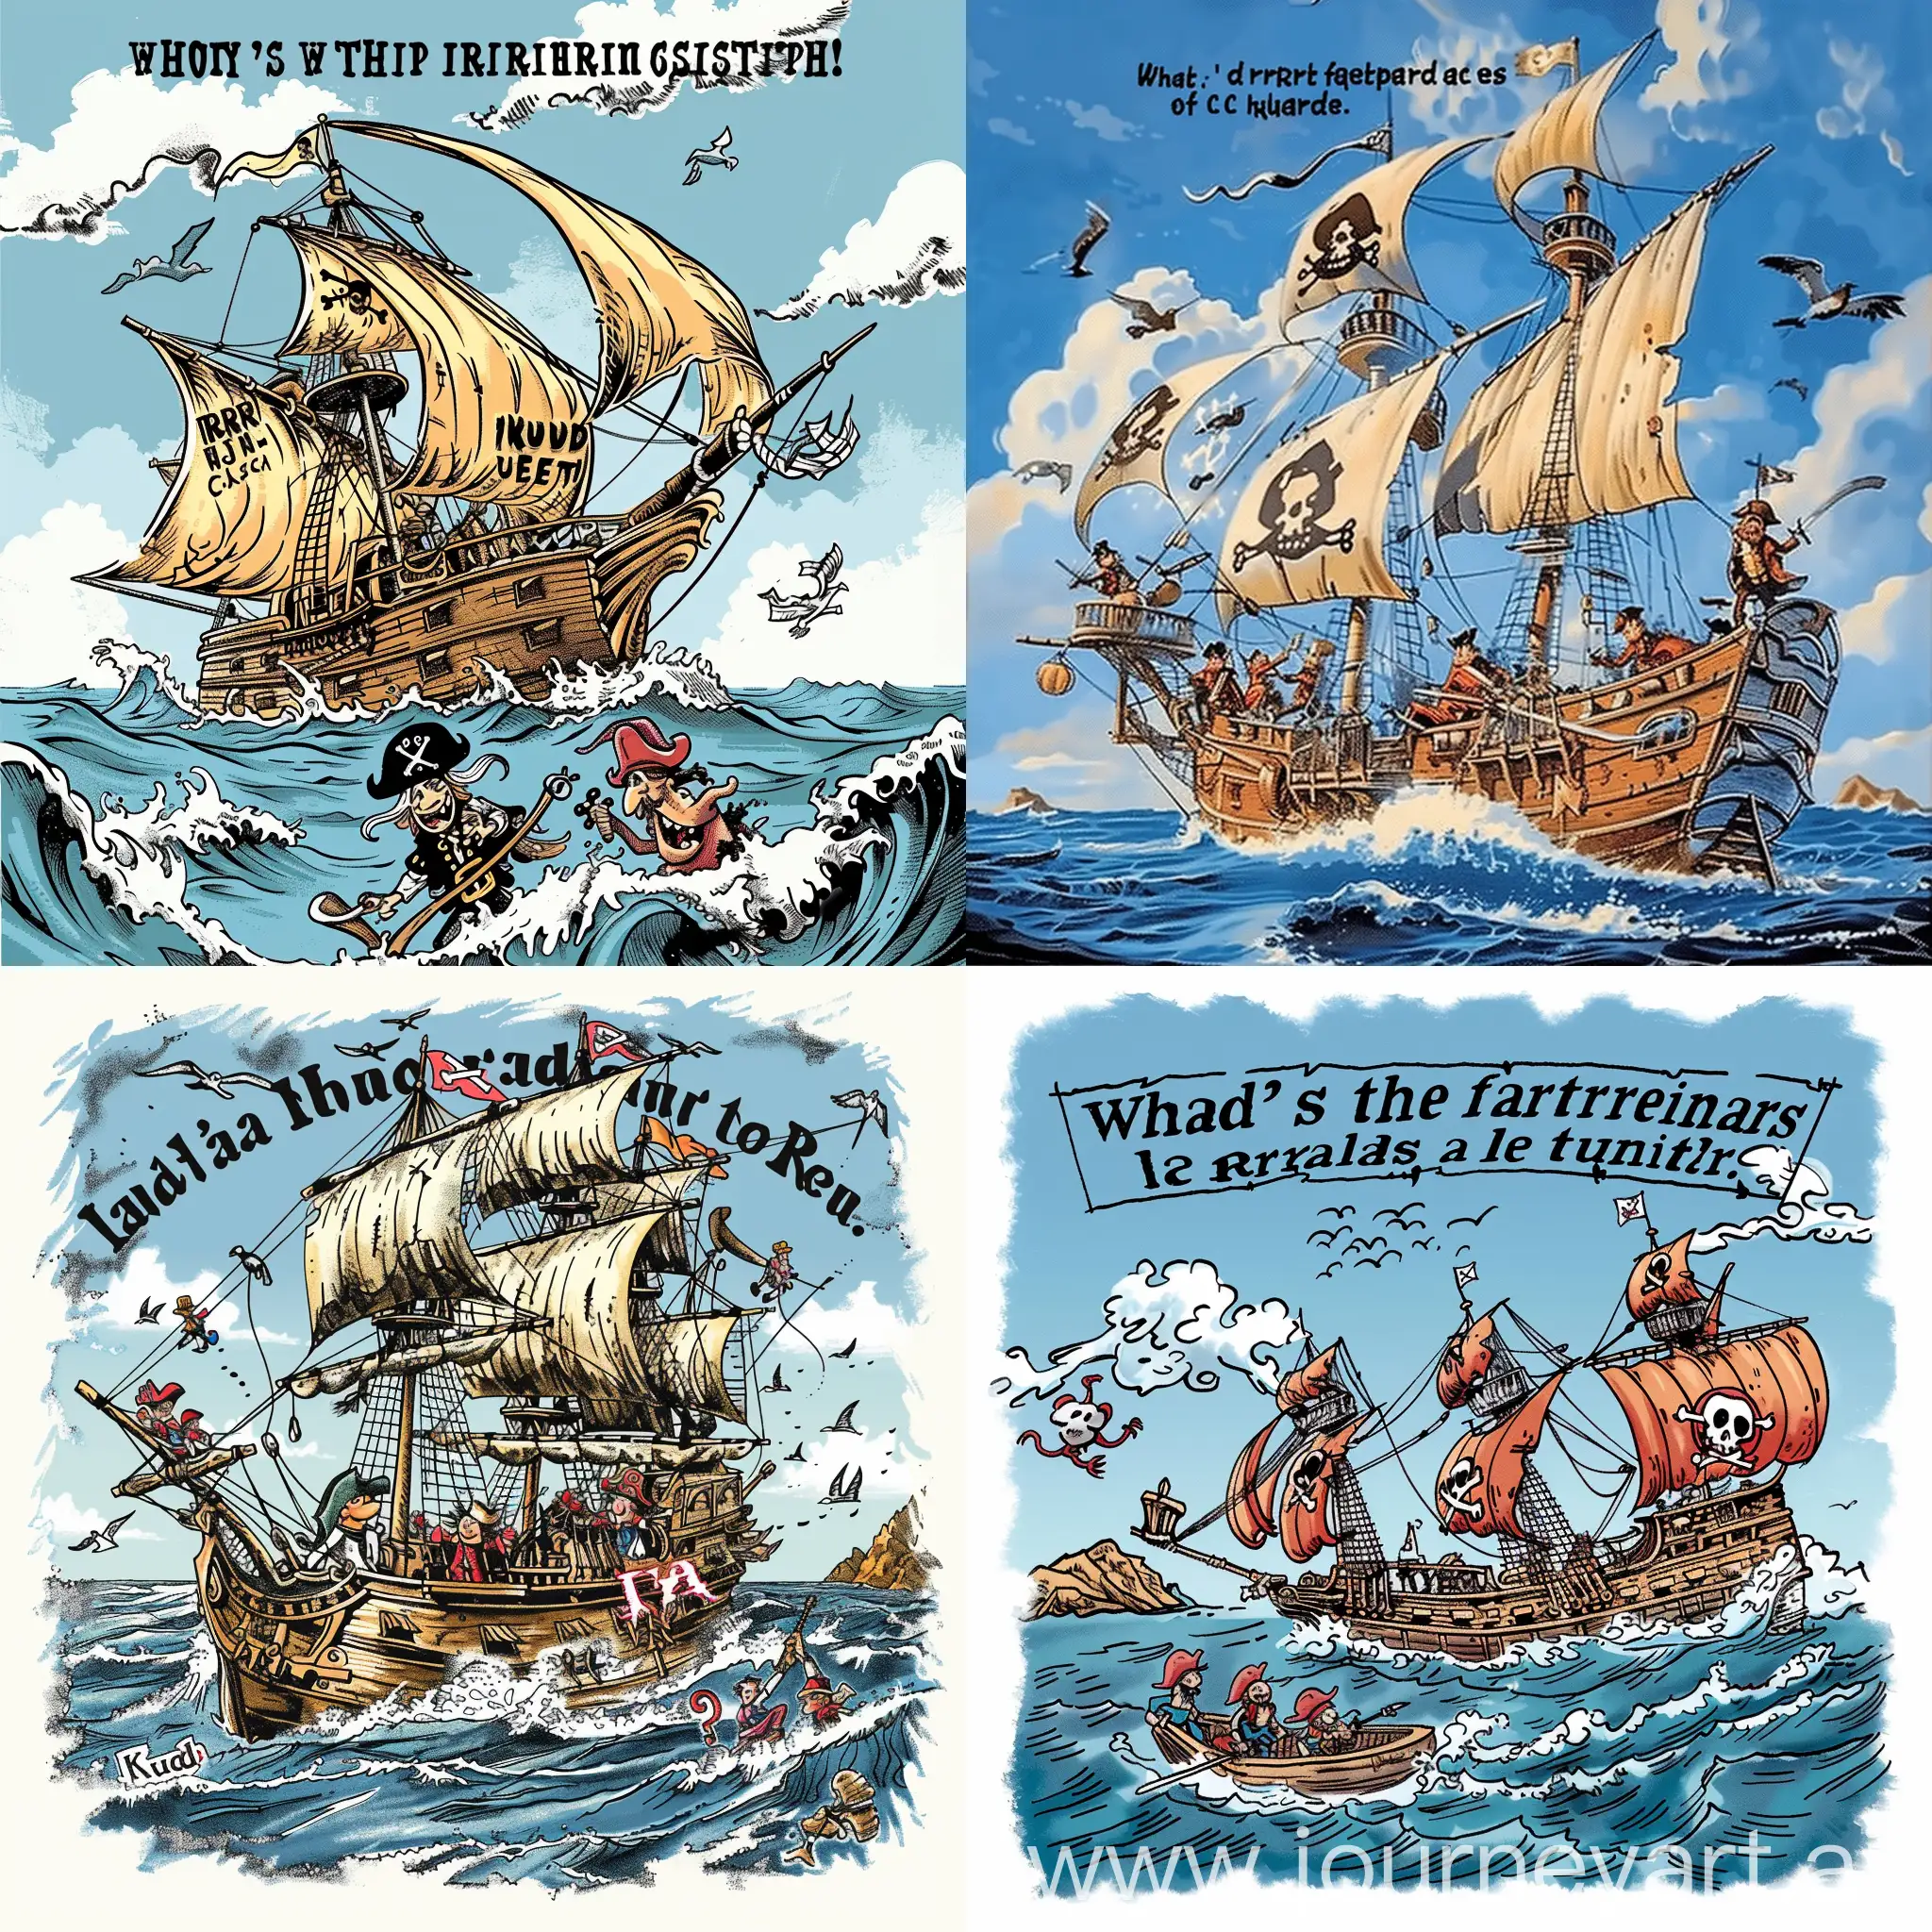 Kuds tee-shirt design, Cartoon of a pirate ship and crew on the open ocean 

With the the joke printed above the picture 

What's a pirates favourite letter?

And below the picture printed

You'd think it be RRRR but in fact it's the C...